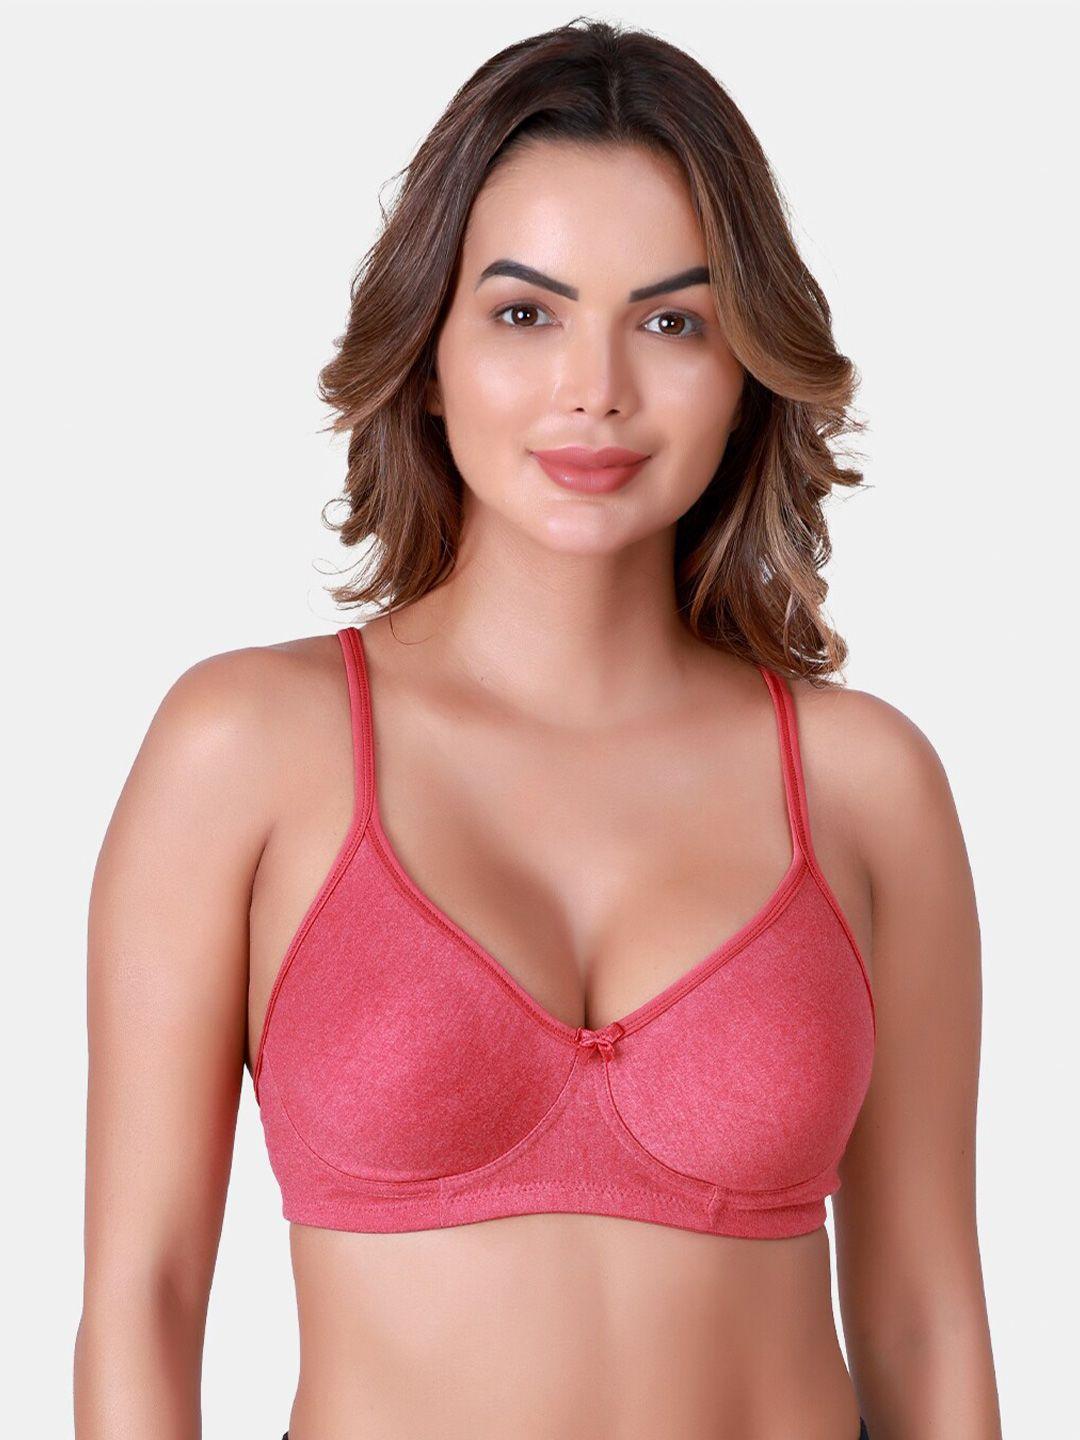 skdreams-full-coverage-non-padded-seamless-cotton-t-shirt-bra-with-all-day-comfort